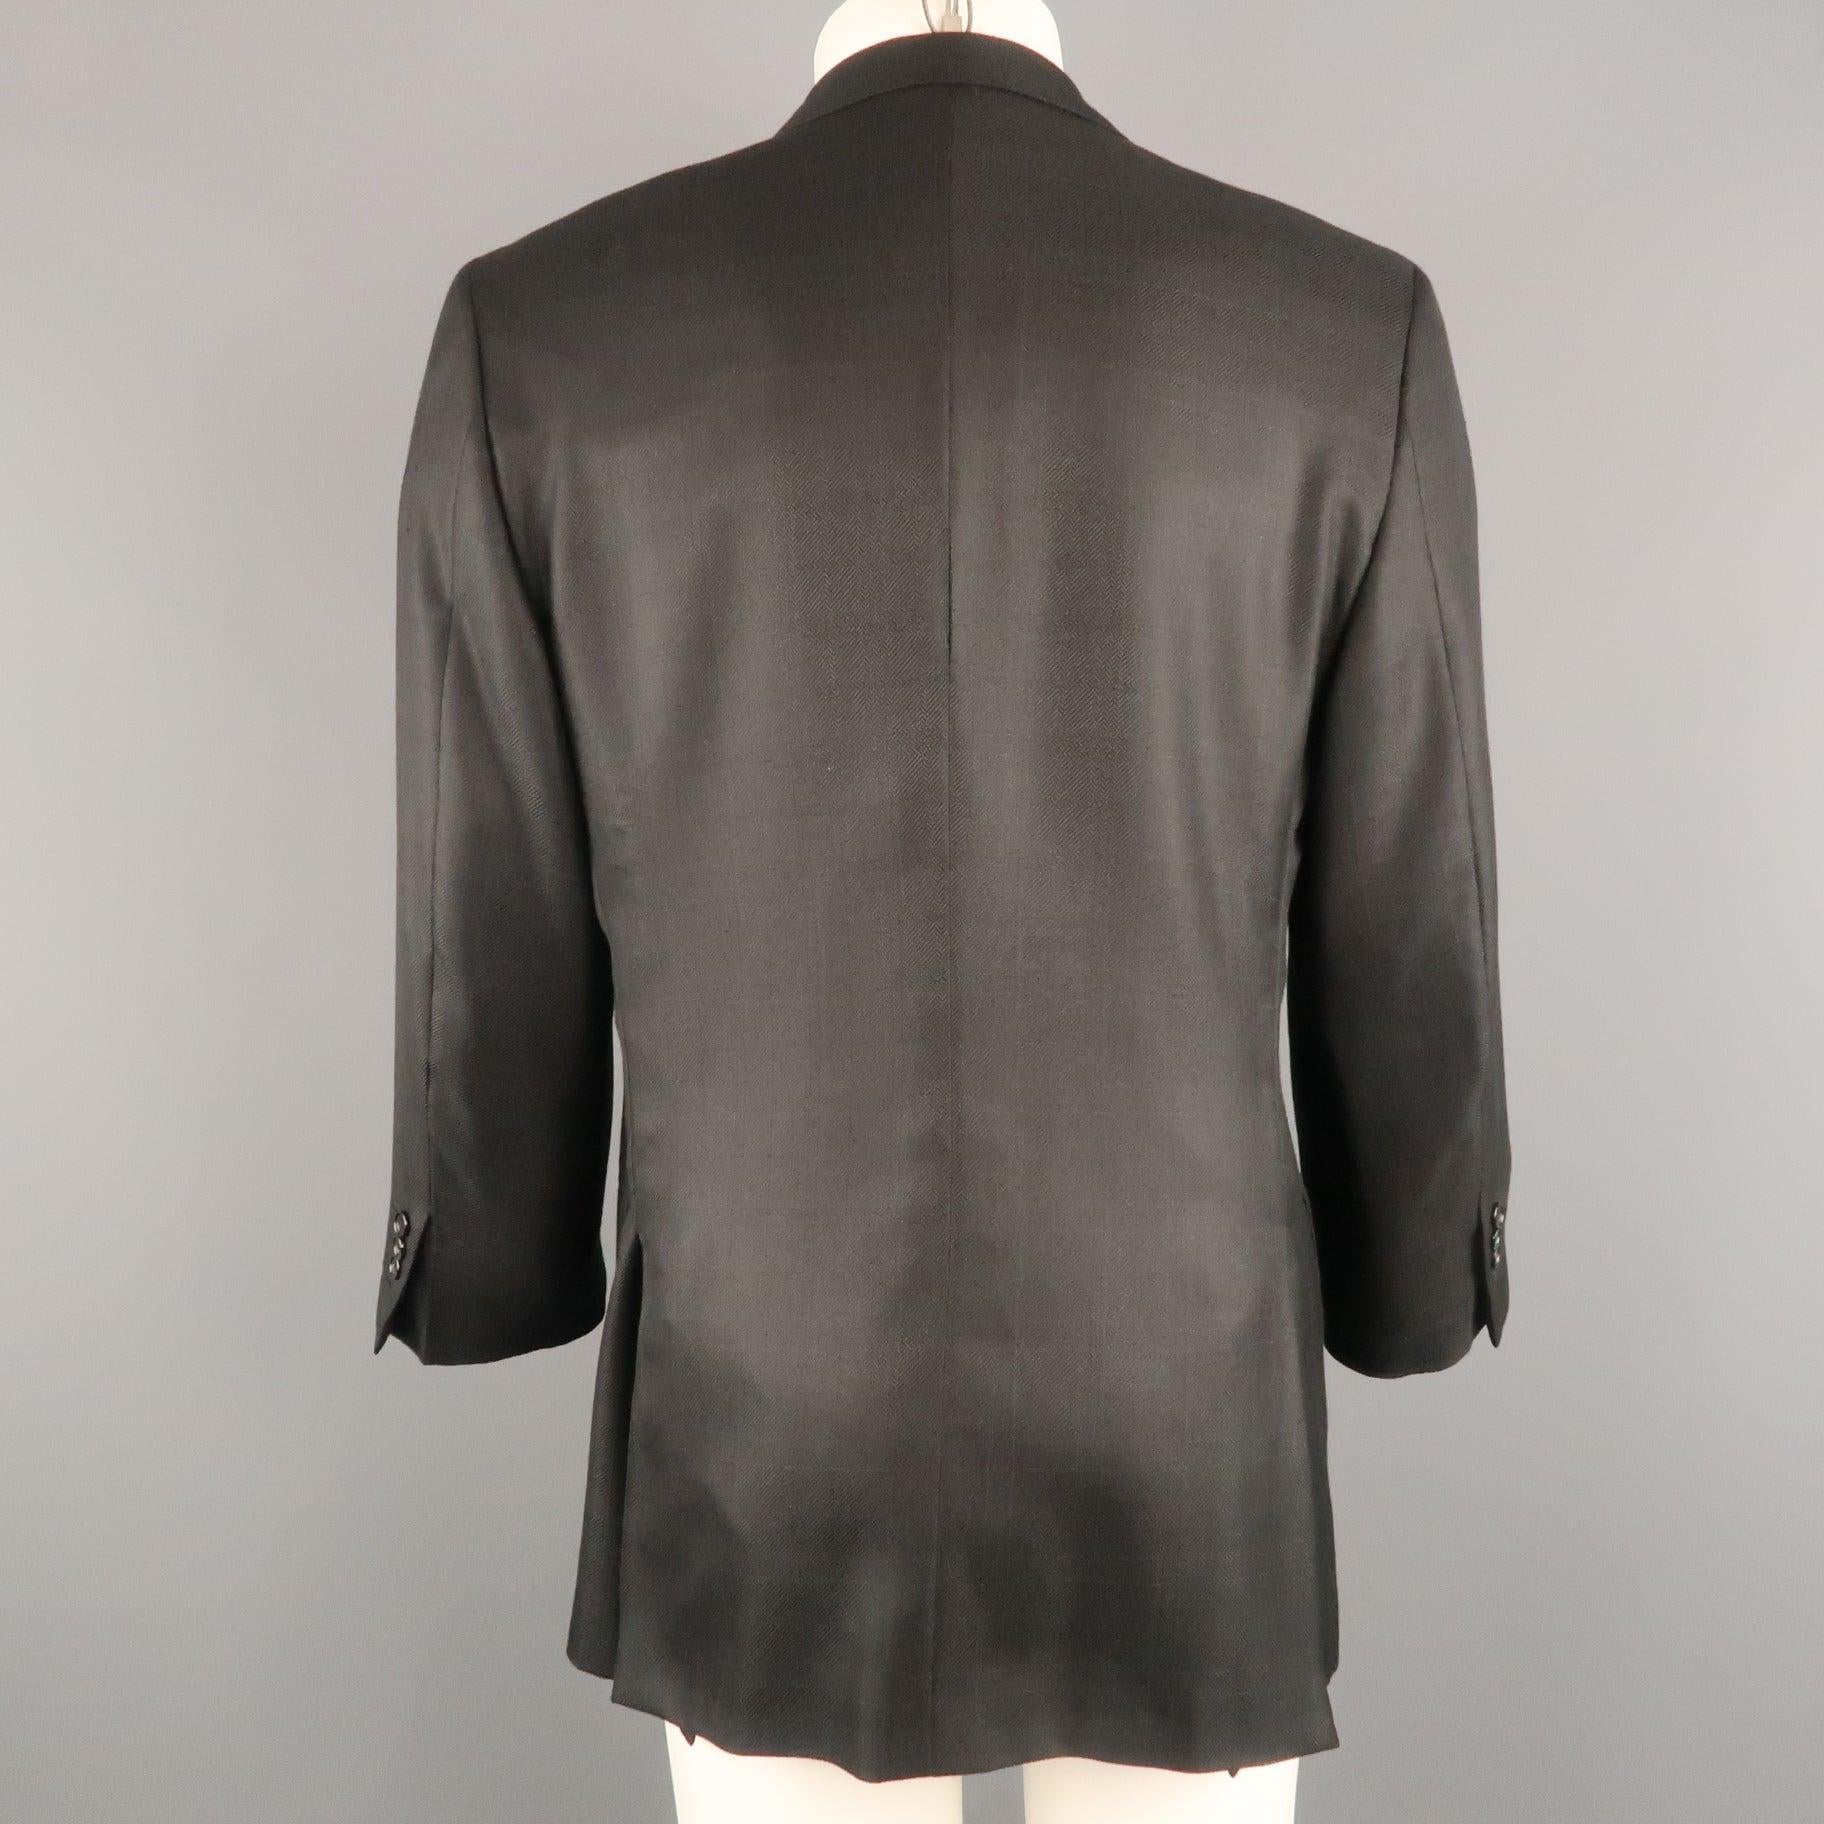 Vintage BRIONI sport coat comes in wool silk blend windowpane fabric with a notch lapel, single breasted, three button front, and functional button cuffs. Made in Italy.Good Pre-Owned Condition.  

Marked:   IT 52 

Measurements: 
 
Shoulder: 18